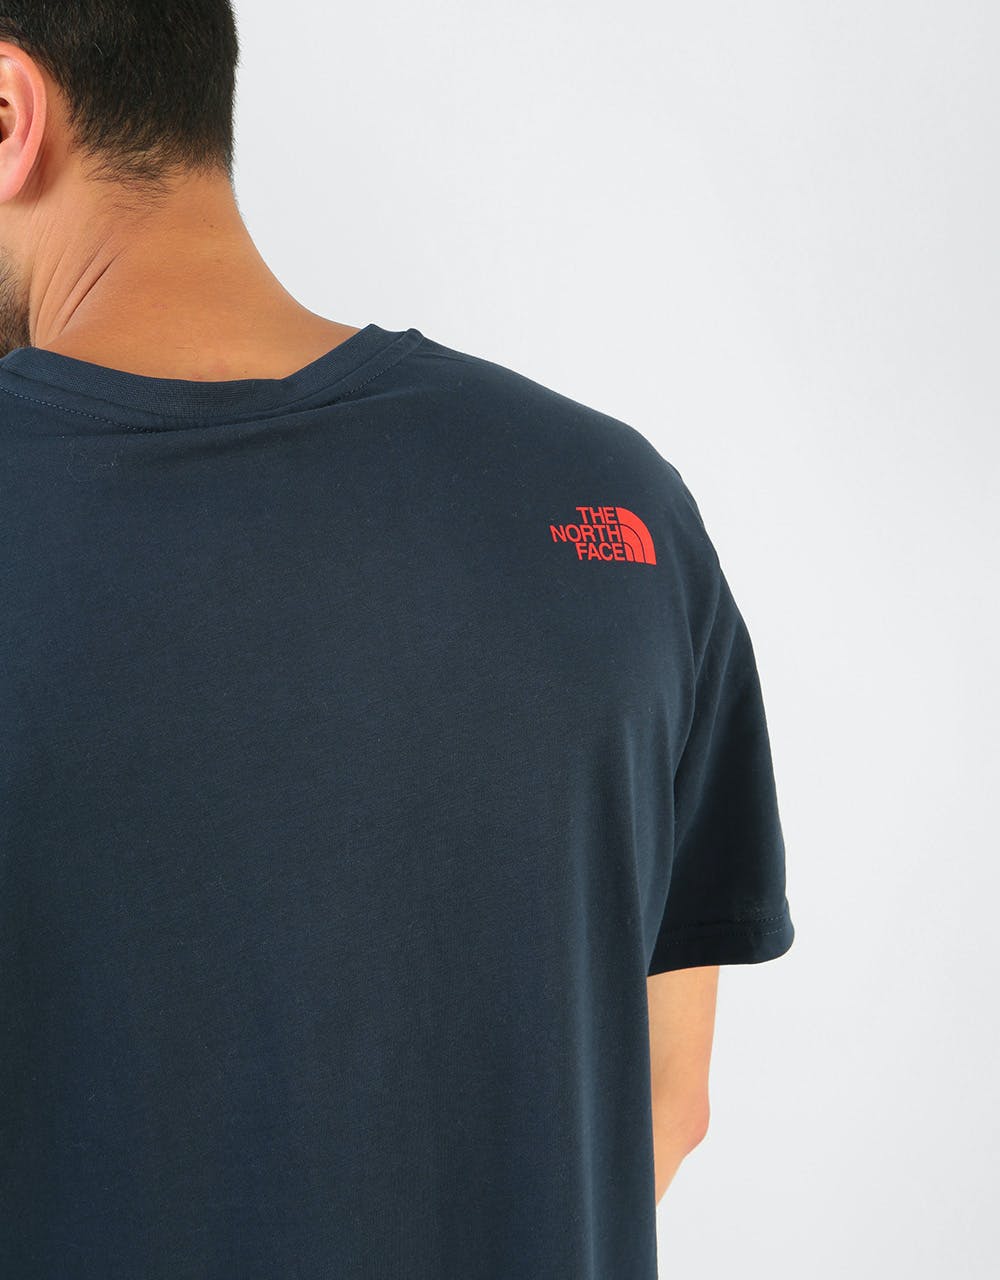 The North Face S/S Simple Dome T-Shirt - Urban Navy/Fiery Red